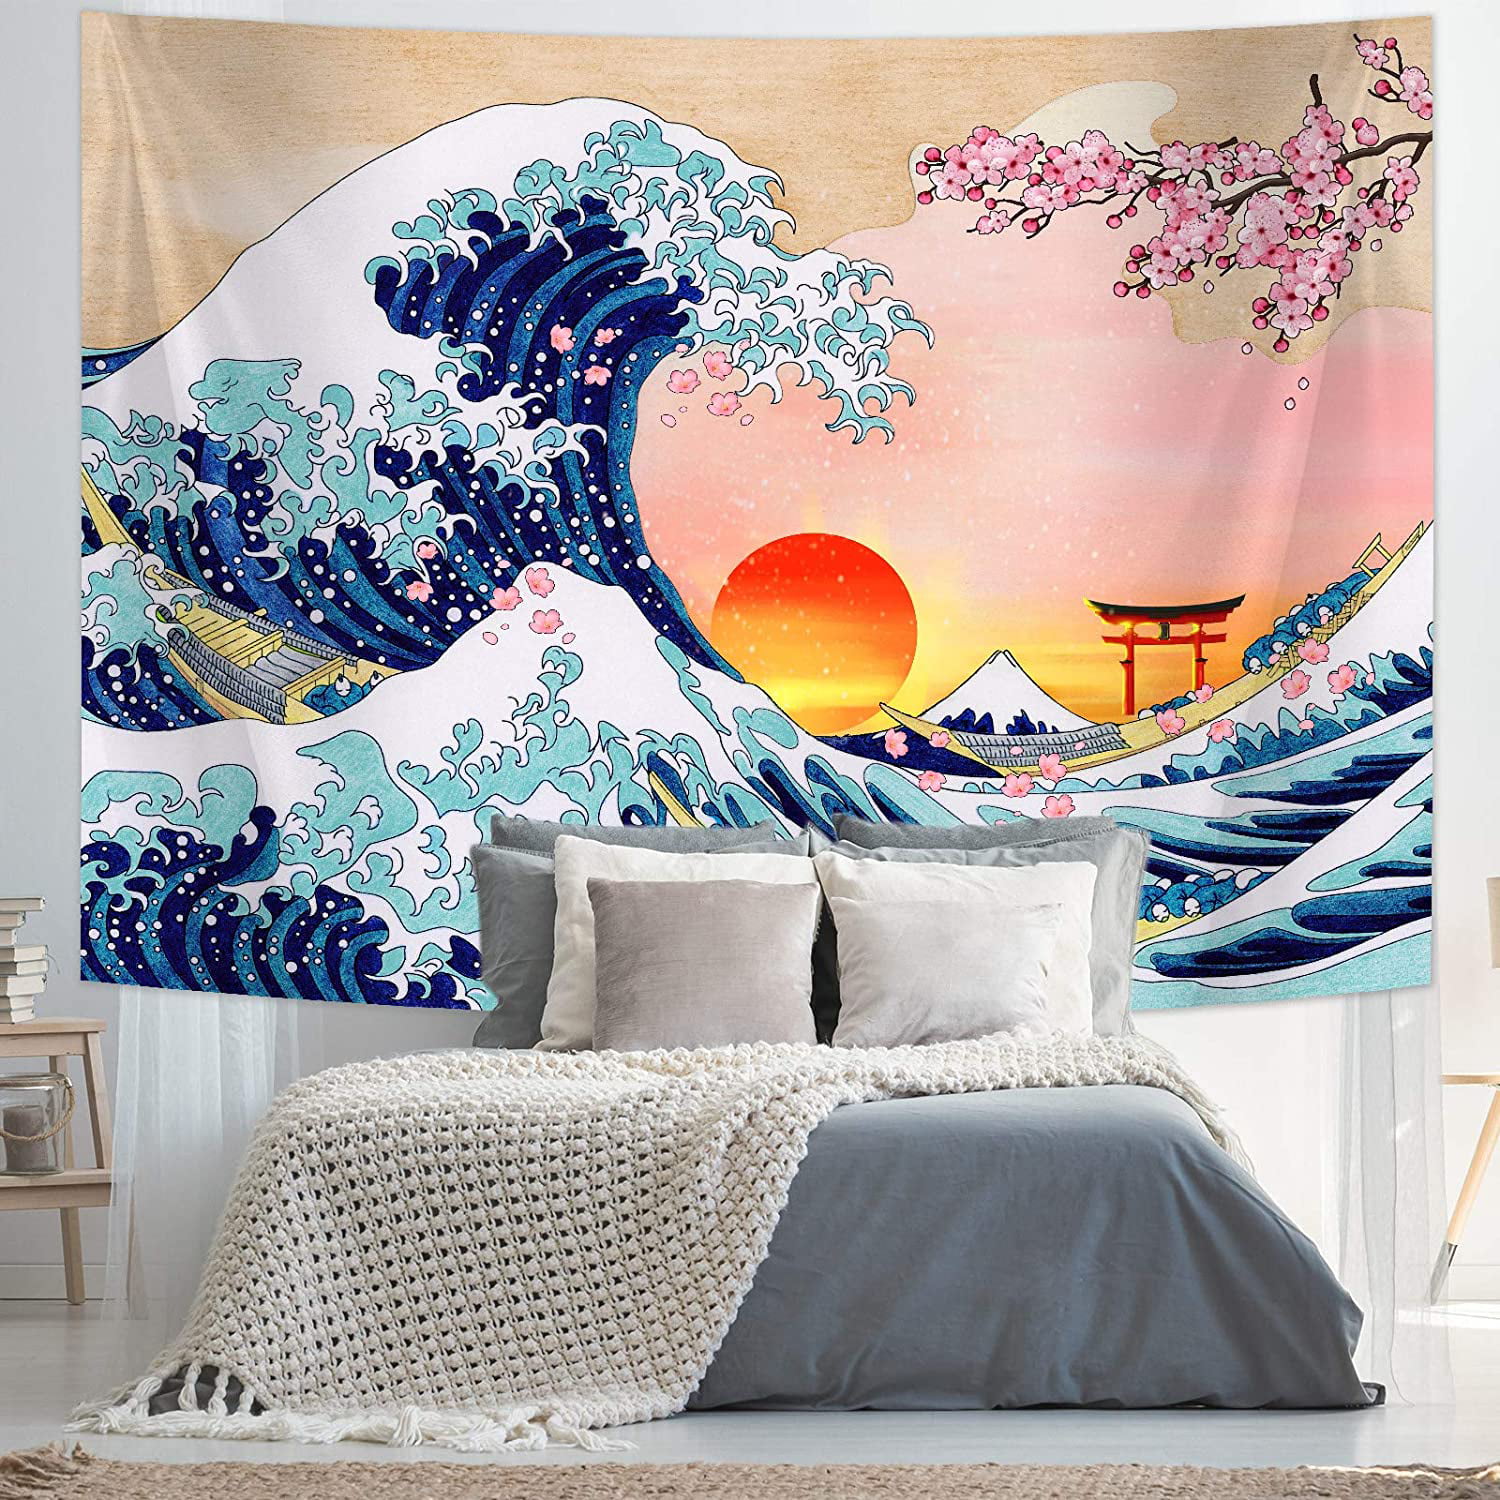 Abstract Wave Spray Tapestry Wall Hanging Living Room Bedroom Dorm Decor 